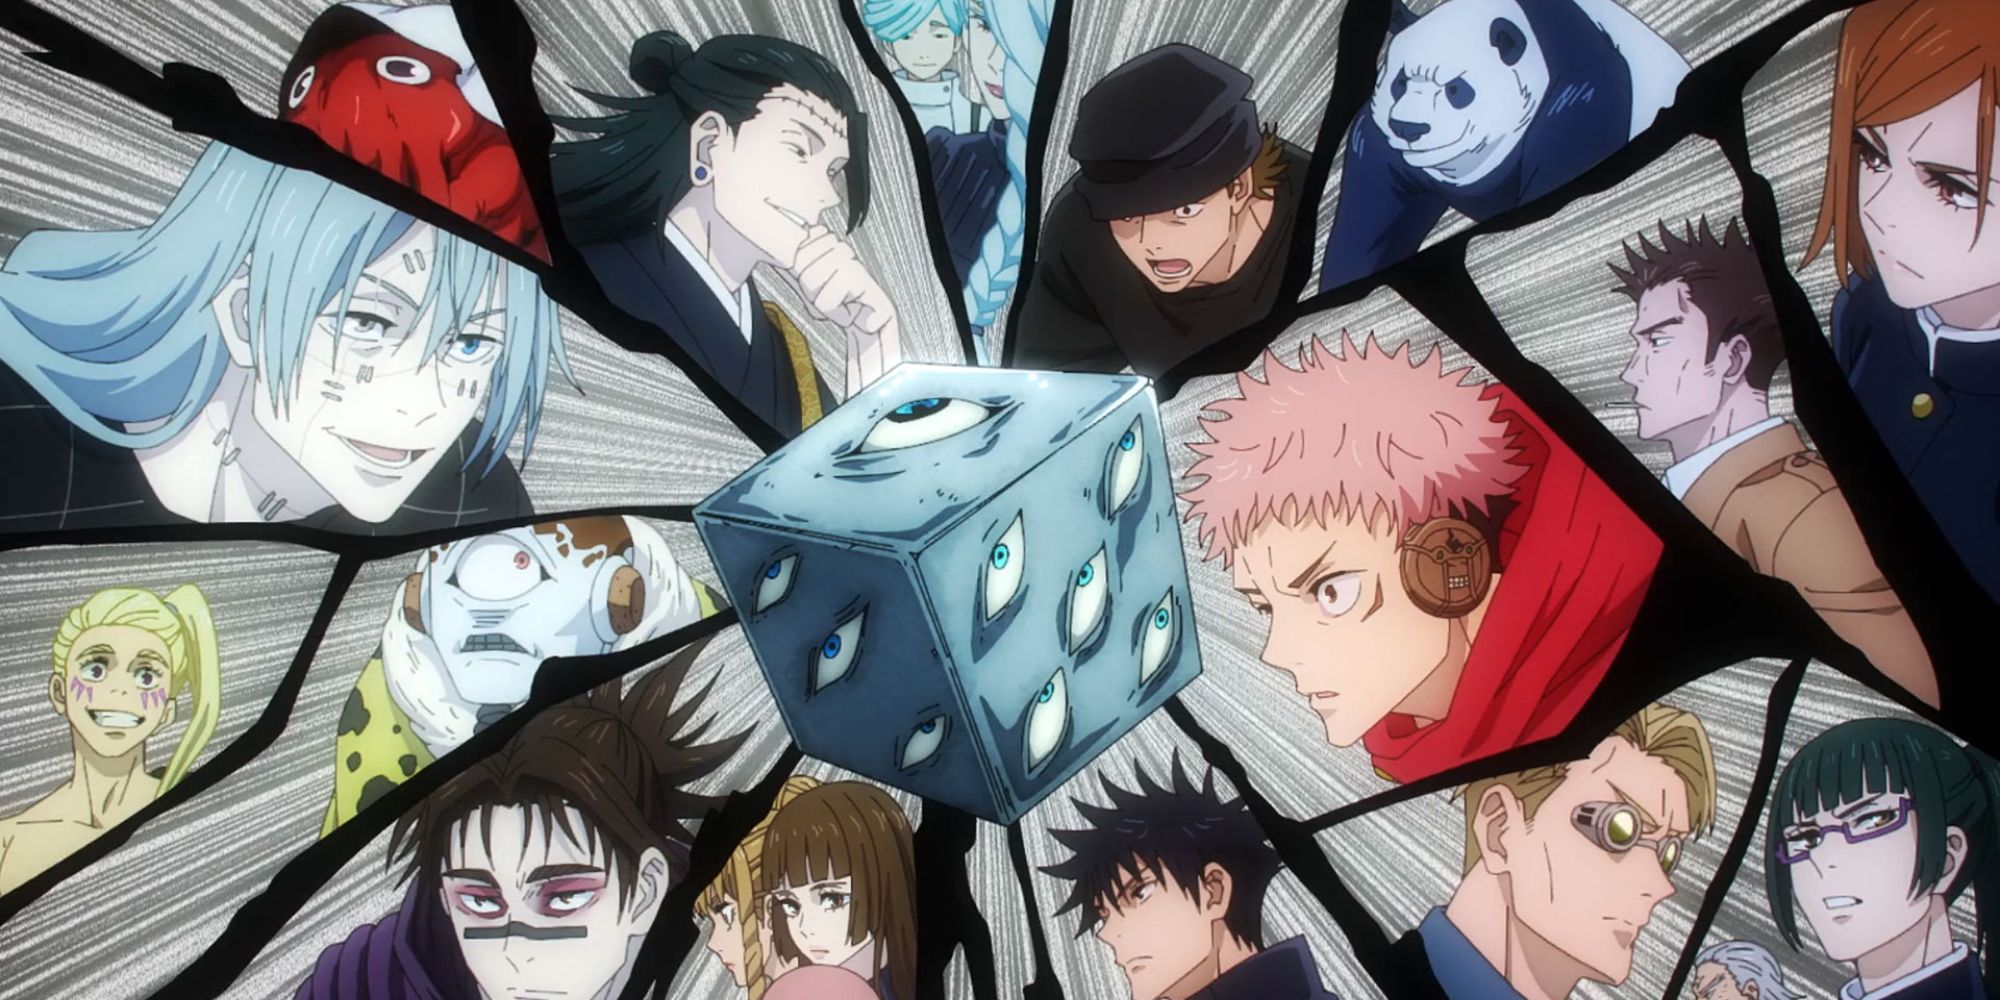 JUST IN: JUJUTSU KAISEN Season 2 revealed the episode 16 preview